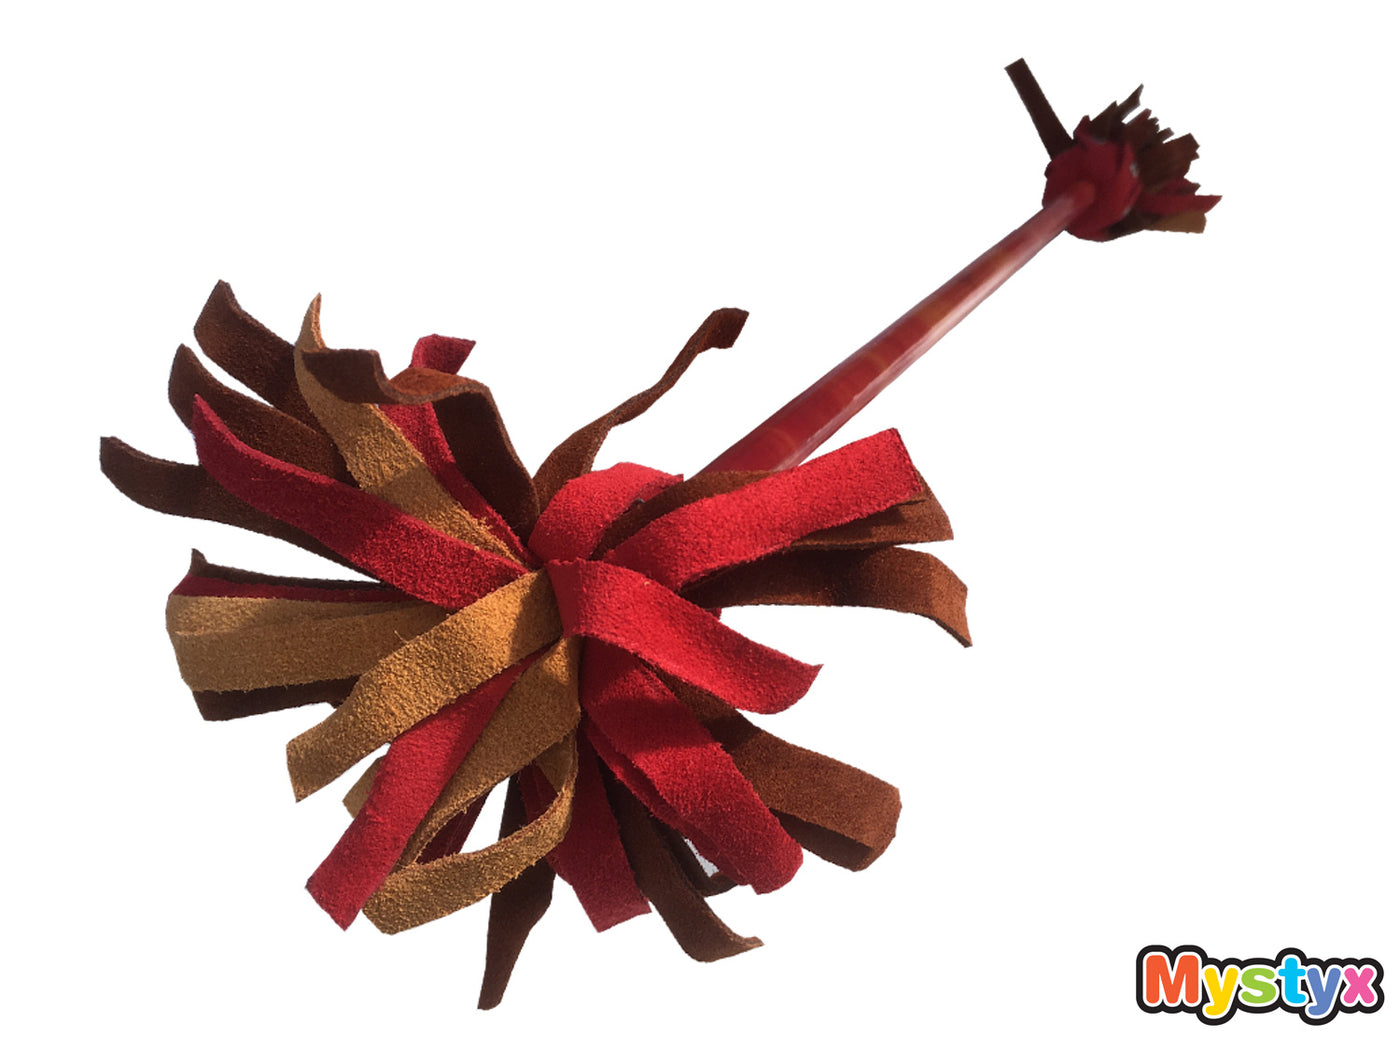 MyKidStyx Devil's Stick / Flower Stick (3 to 7 years) in Silicone and Leather - Yellow and Red Whispers Pattern - Complete Kit